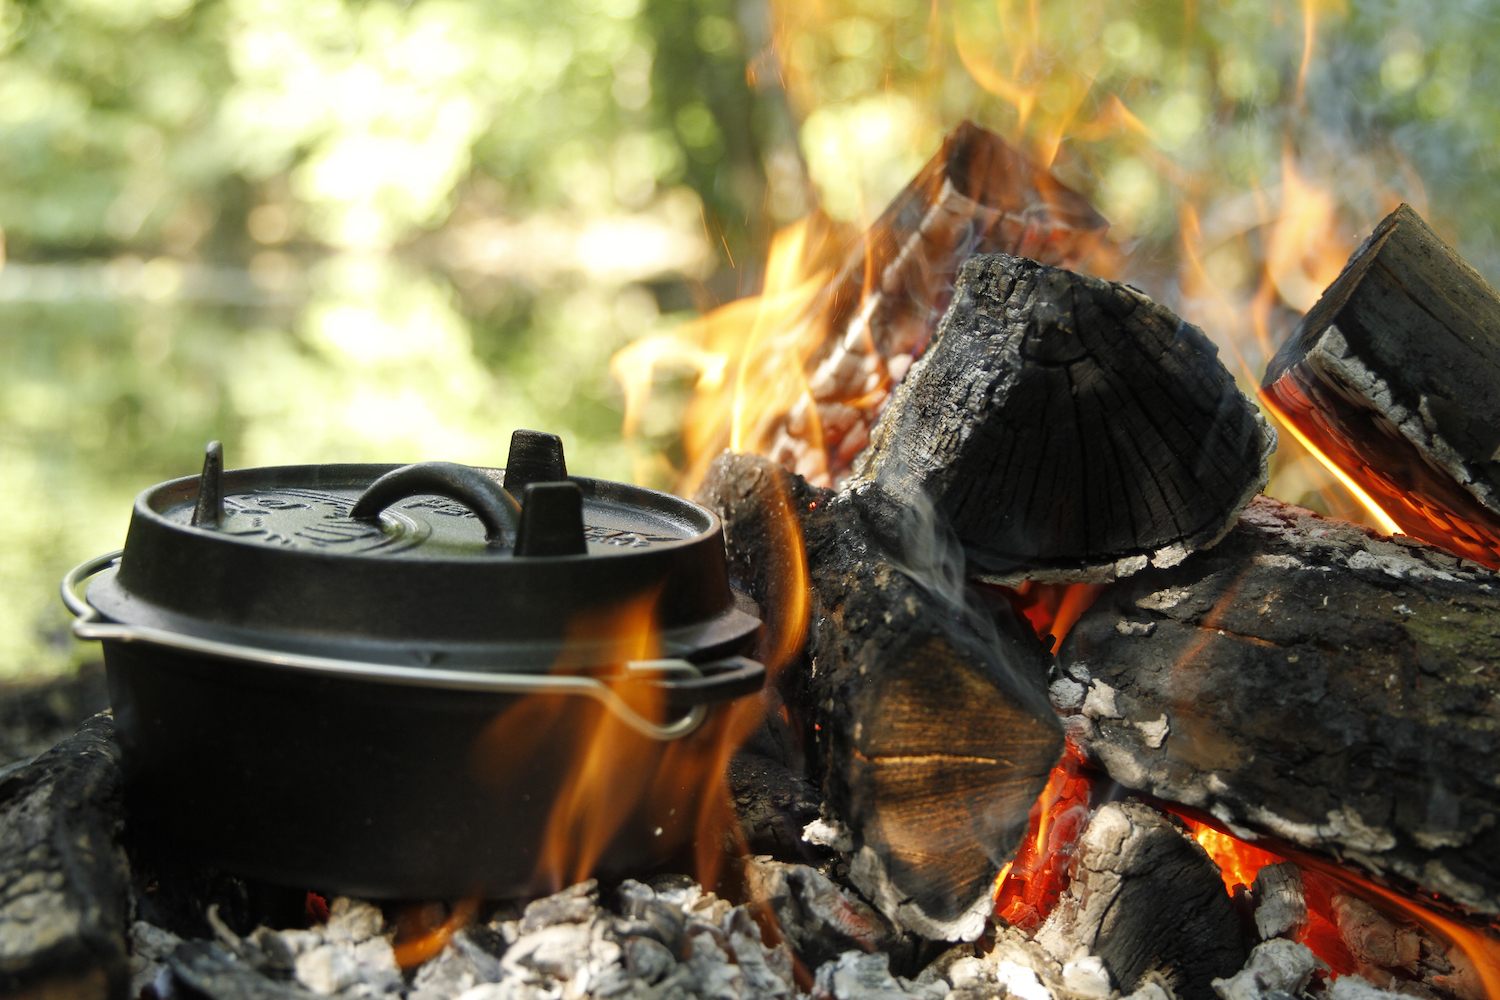 Dutch Oven on coals outdoor cooking fire nature campfire